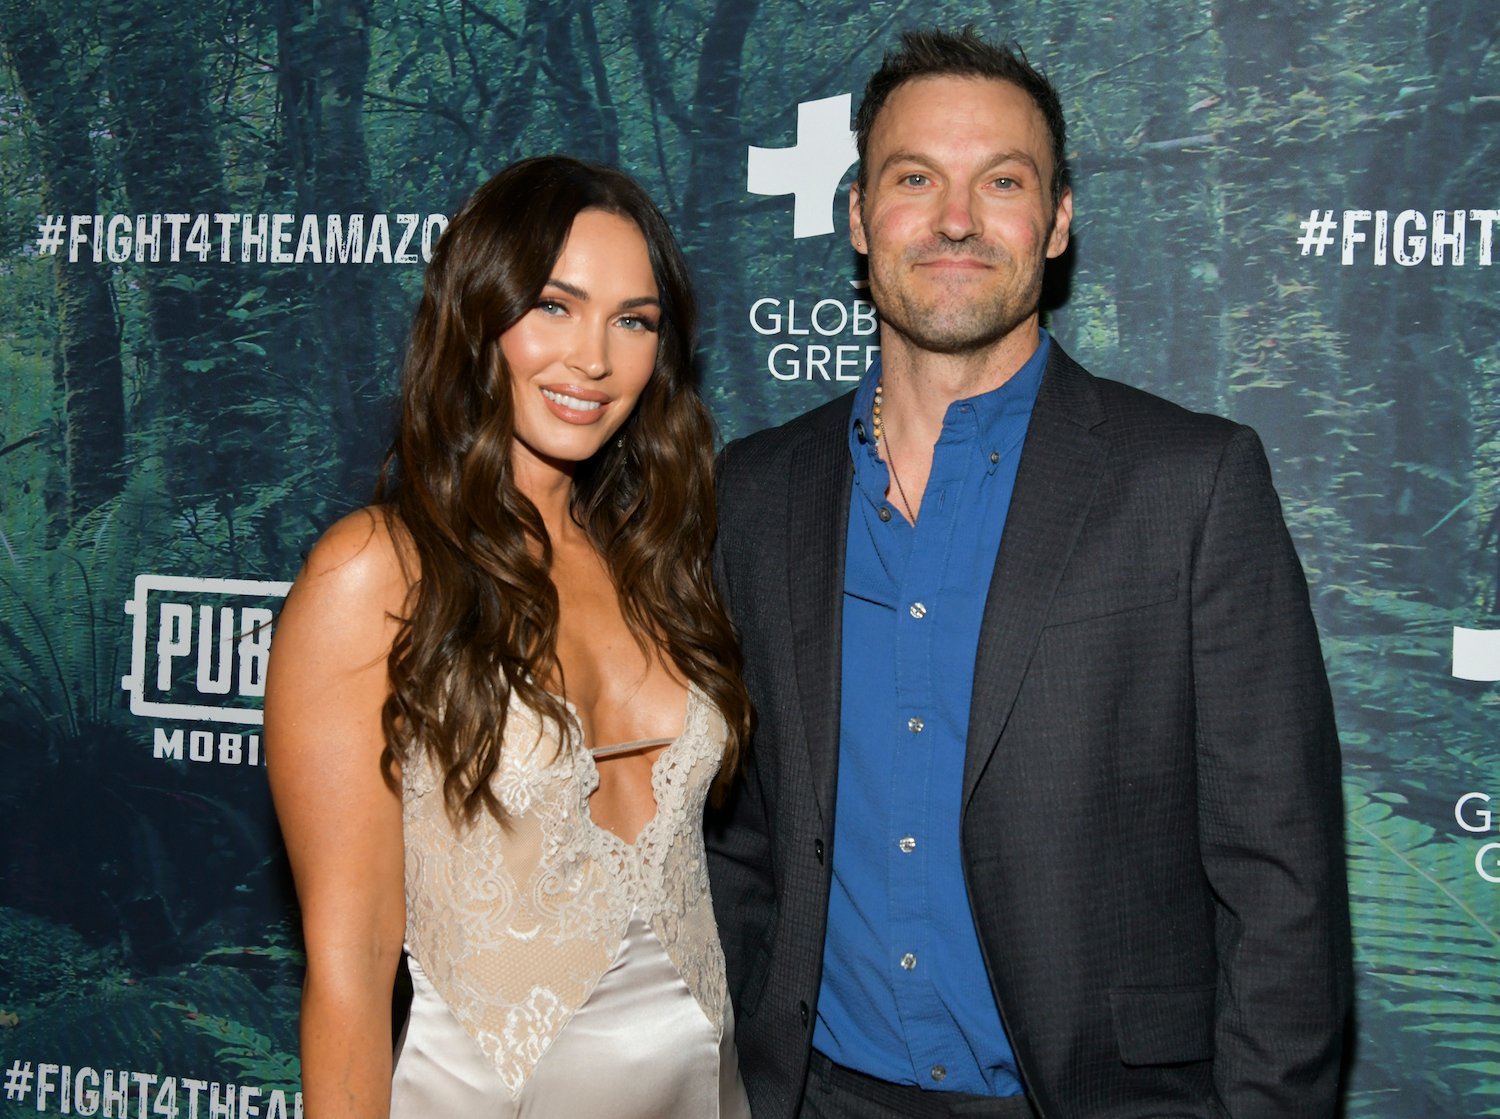 Megan Fox and Brian Austin Green attend the PUBG Mobile's #FIGHT4THEAMAZON Event at Avalon Hollywood on December 09, 2019